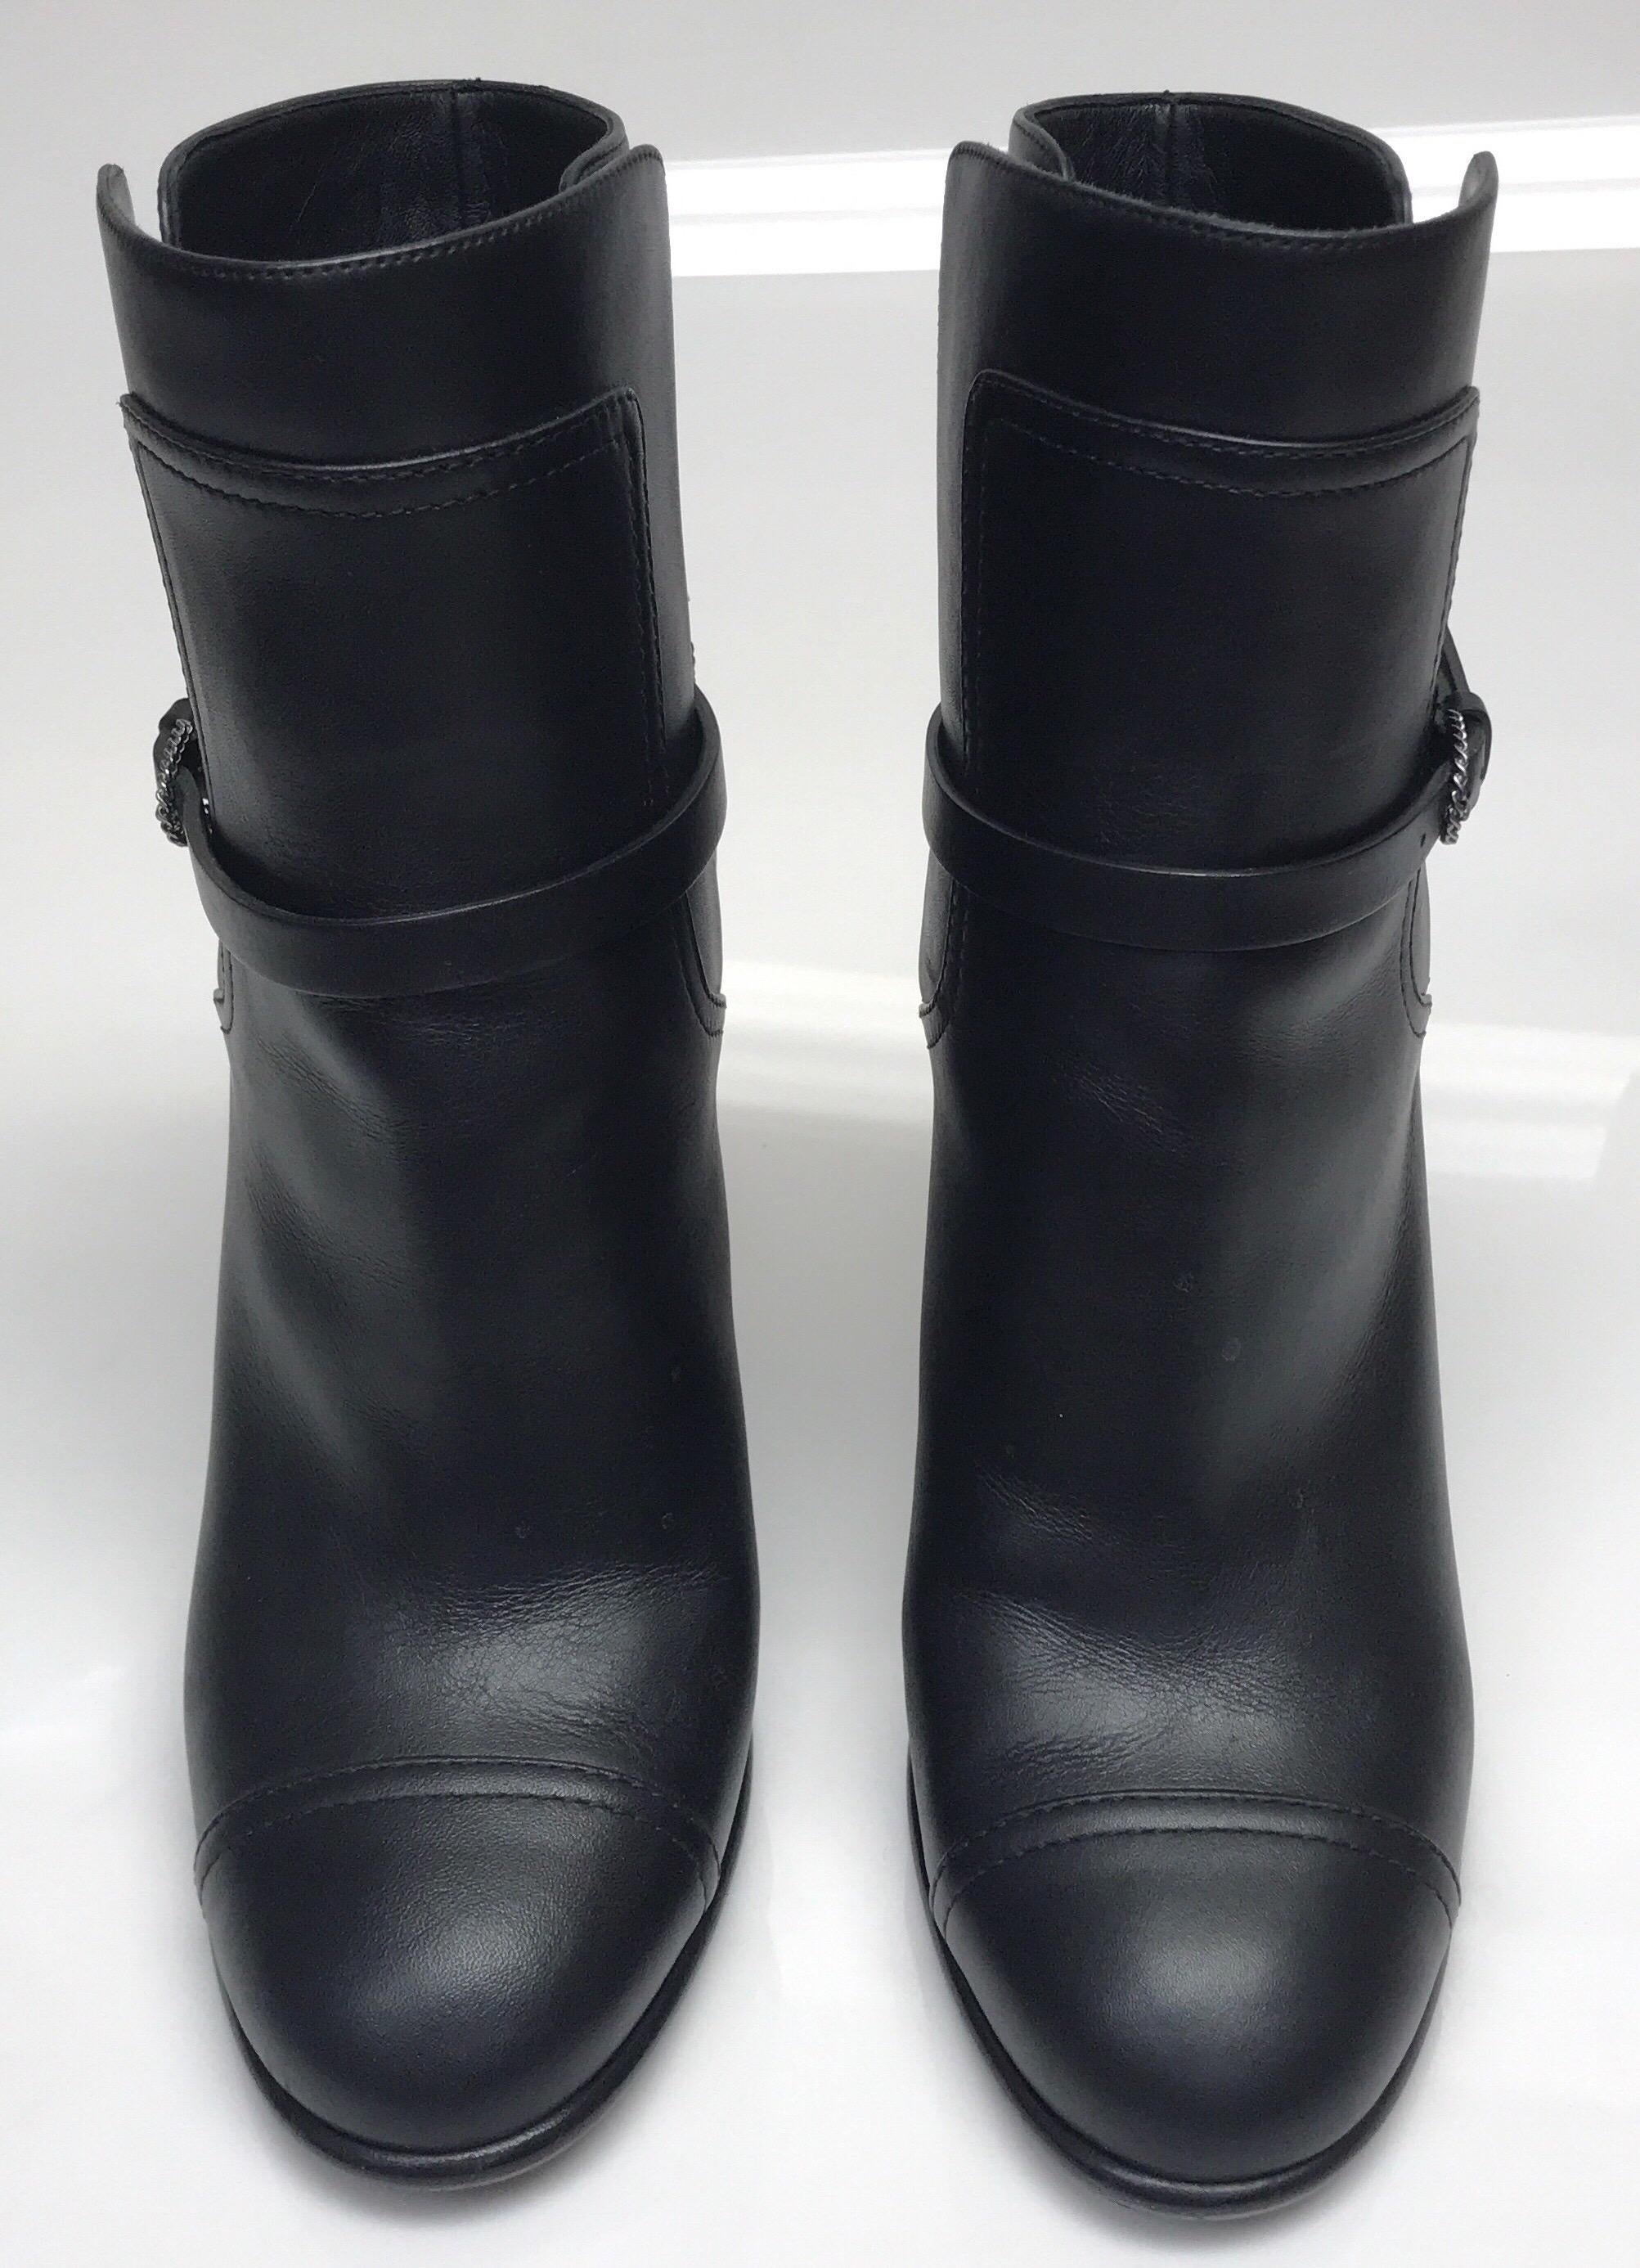 CHANEL Black Leather High Heel Ankle Boots -38. The stunning Chanel boots are in excellent condition. they show barely any sign of use. It is made of black soft leather throughout and has a thin black leather strap around the base of the ankle.